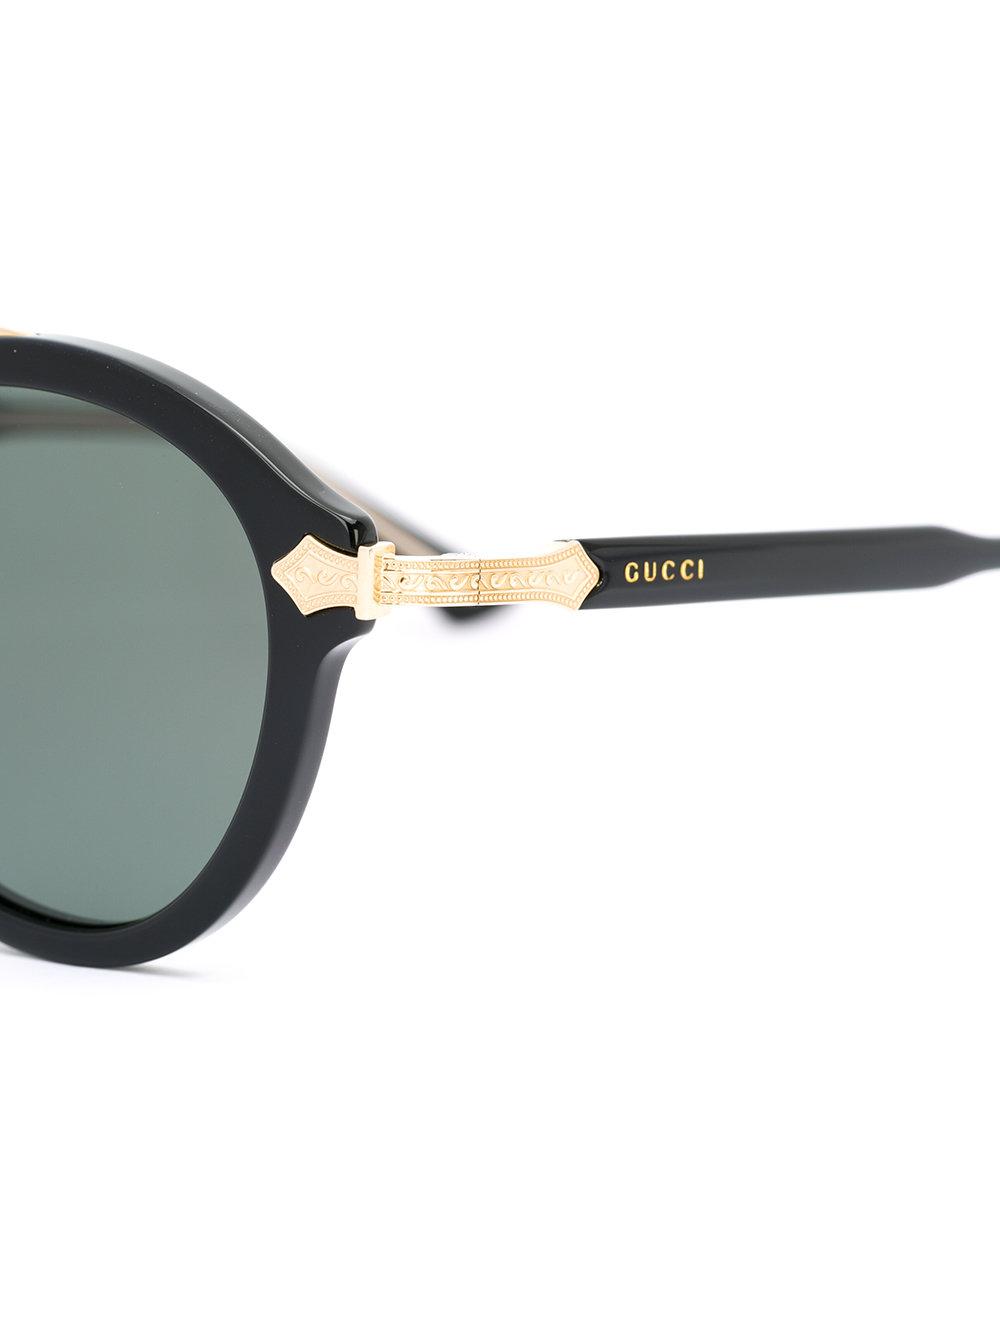 Gucci Japan Special Collection Sunglasses in Black | Lyst